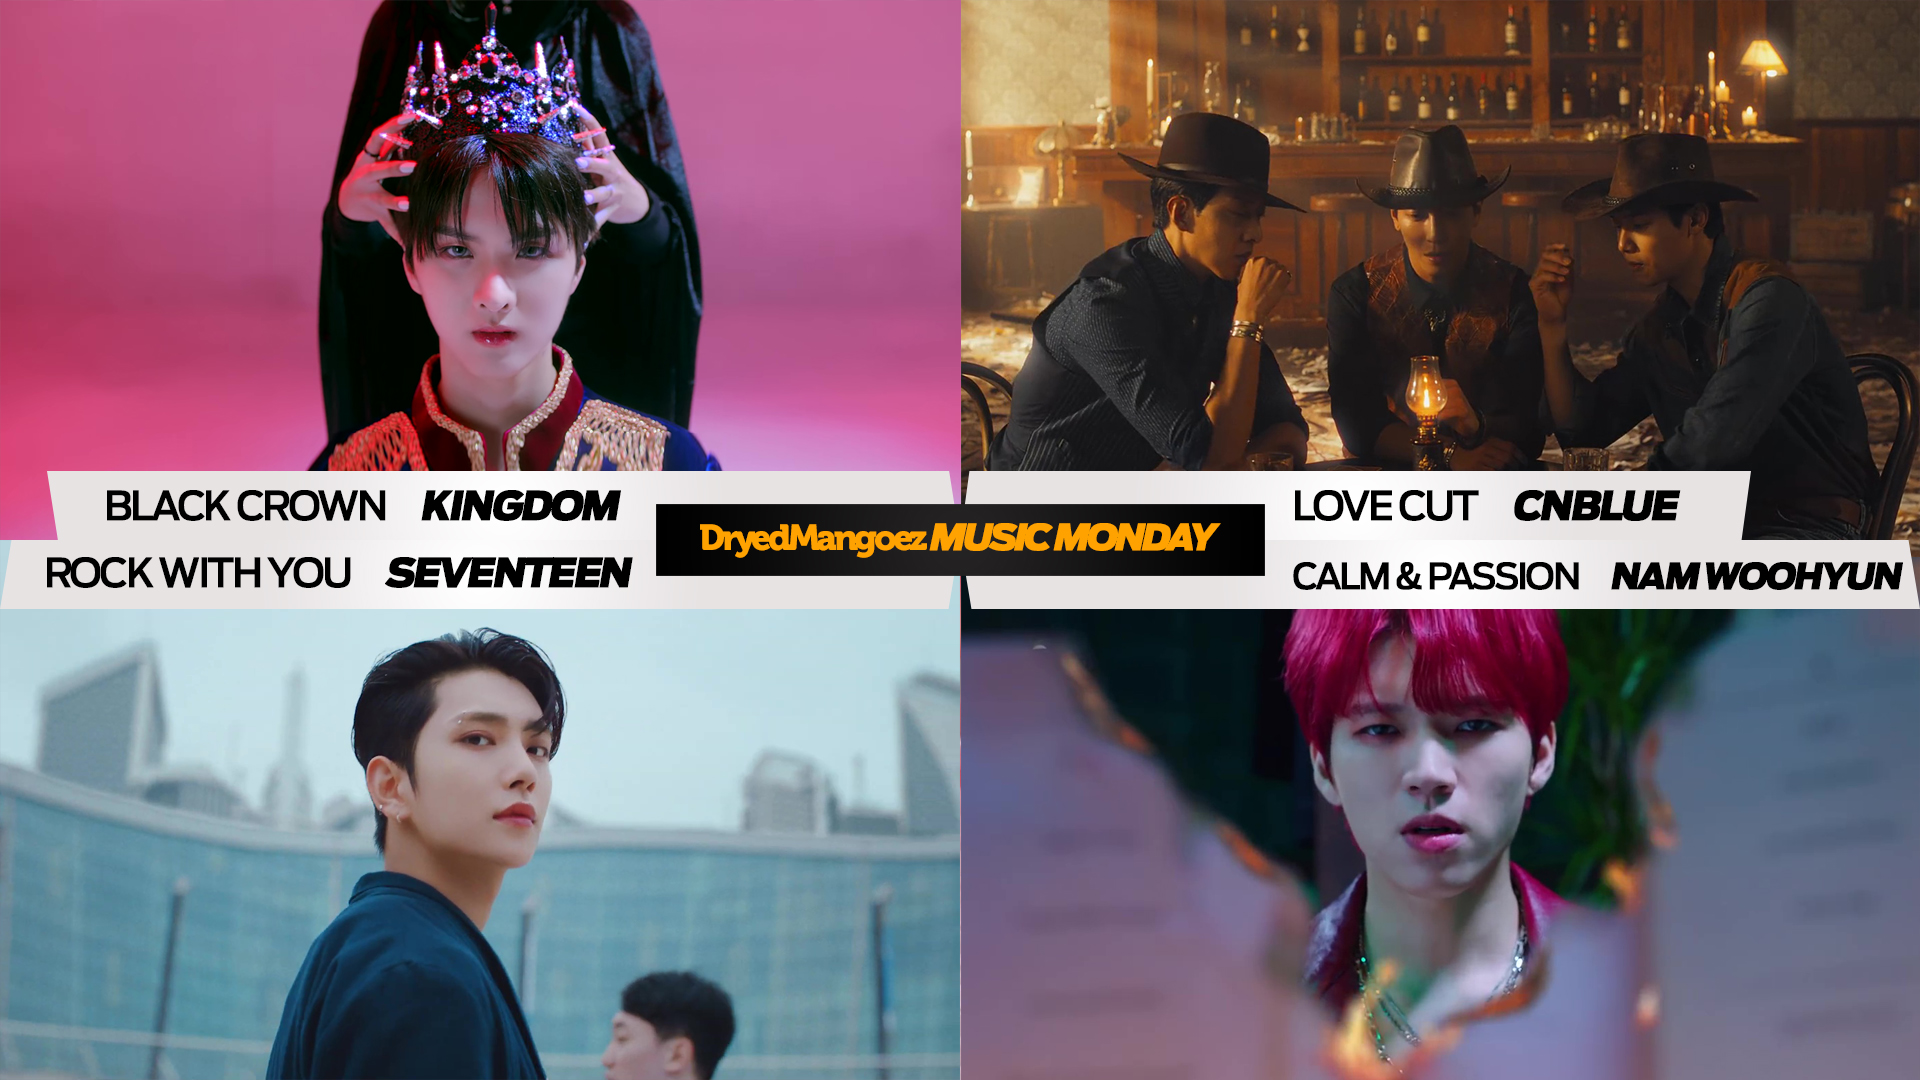 Music Monday, October 25, 2021 (Part 2) – Excellent comebacks from KINGDOM, CNBLUE, SEVENTEEN and Nam Woohyun